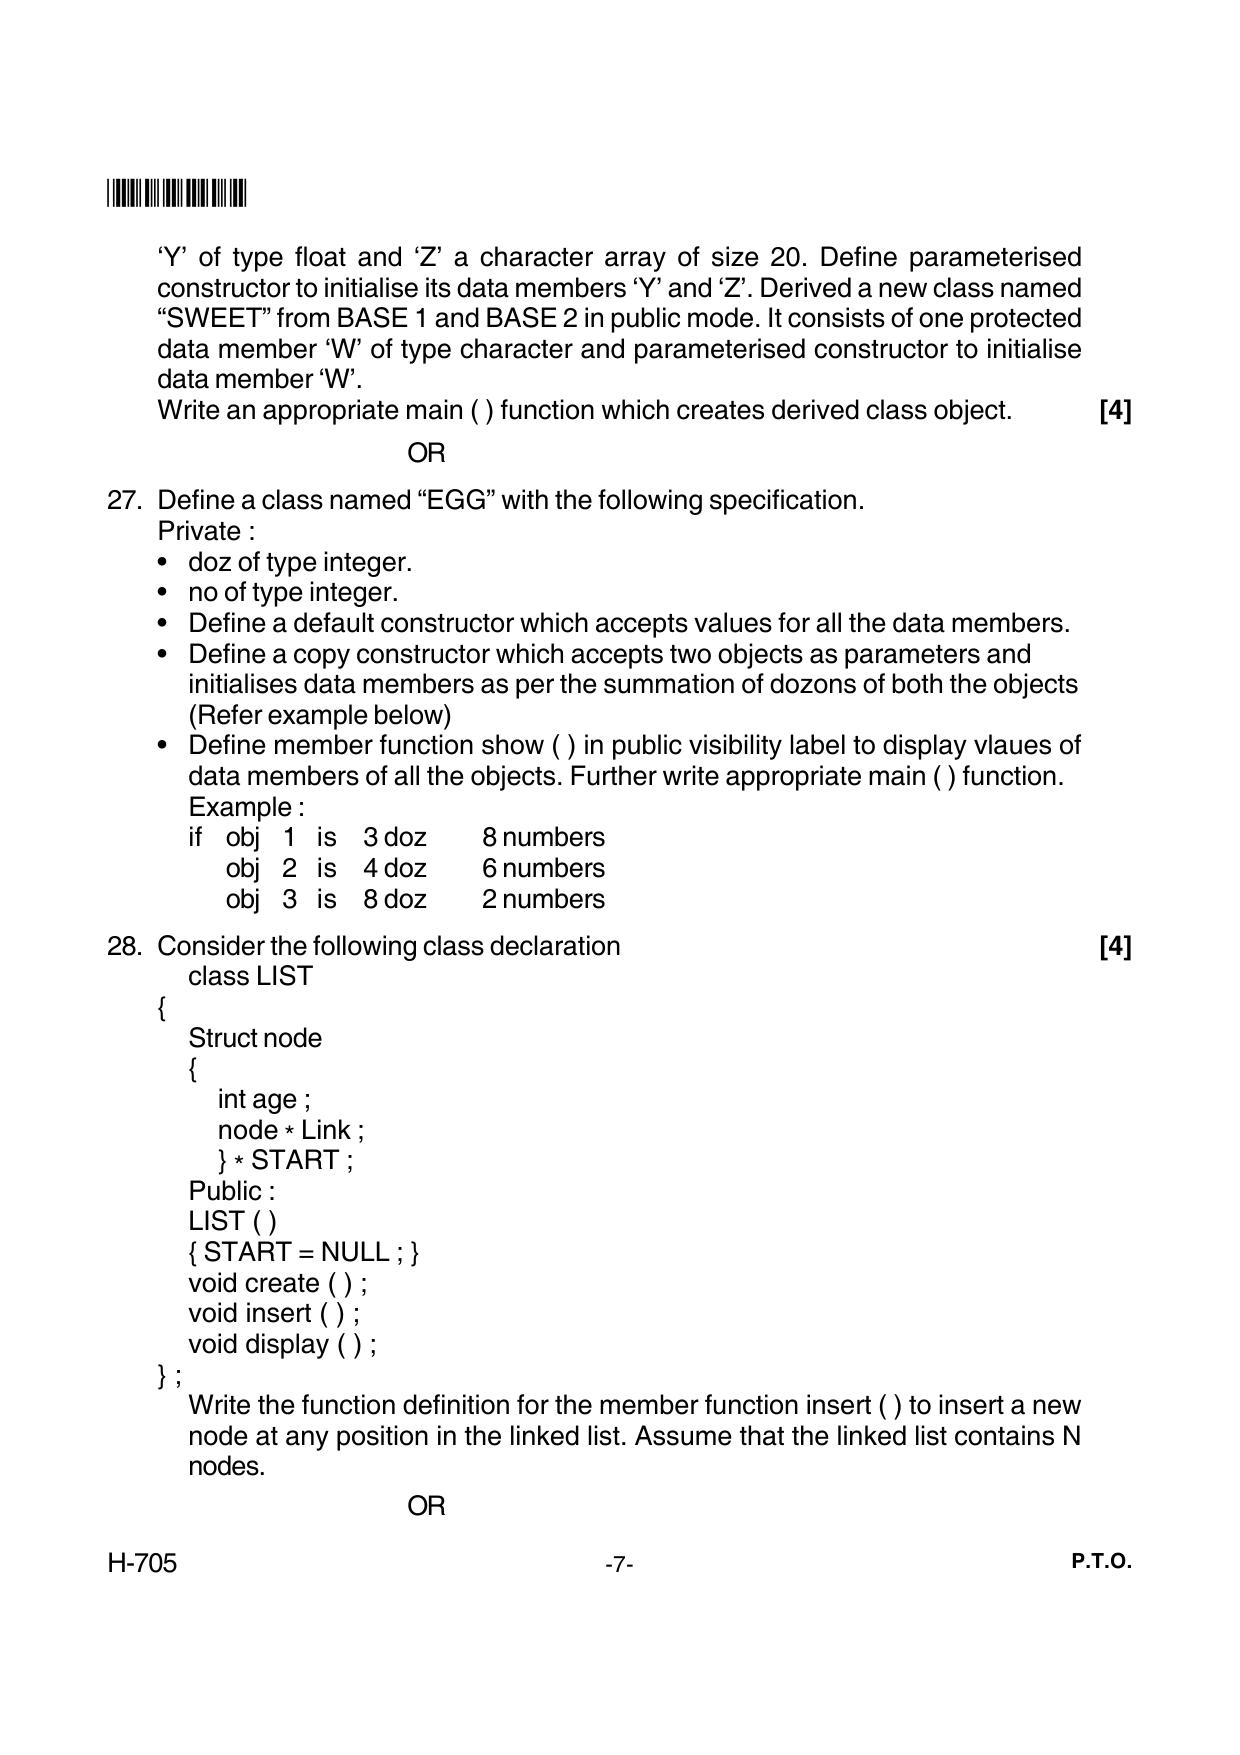 Goa Board Class 12 Computer Science  705 New Pattern Paper 2 (June 2018) Question Paper - Page 7